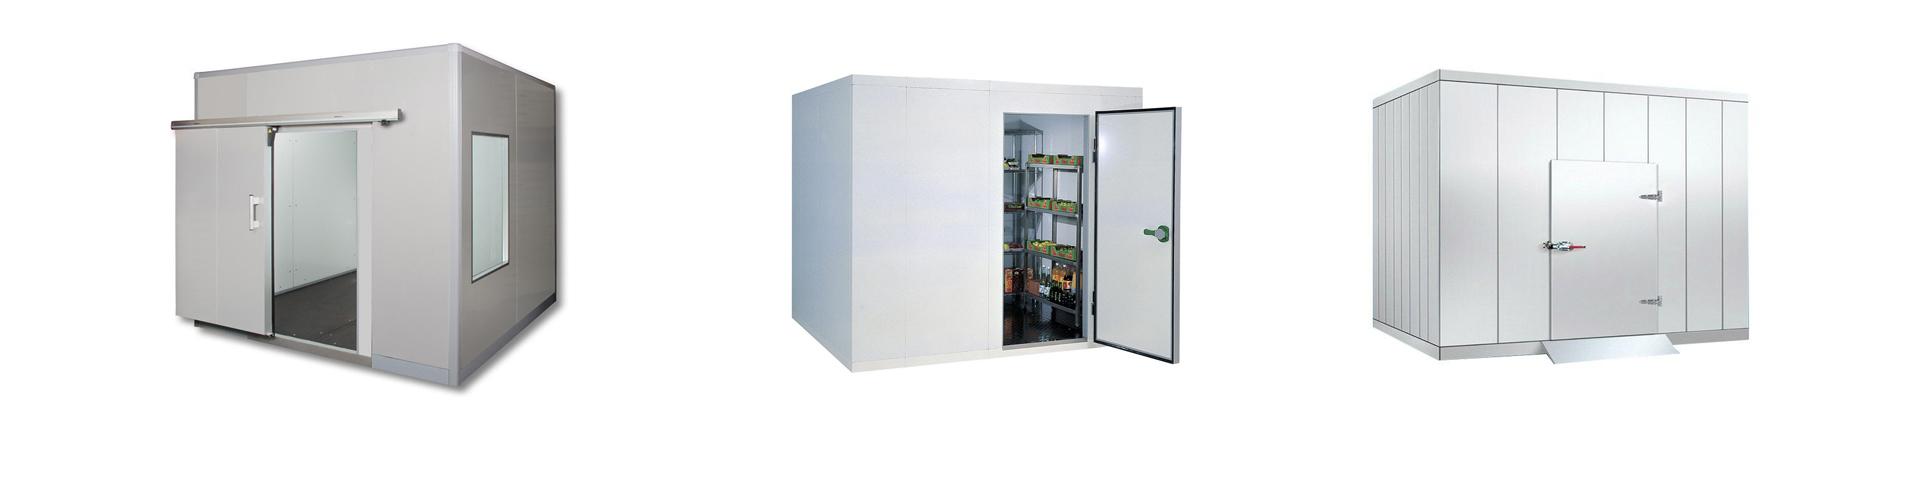 Product Walk in Cold Room Freezer Manufacturer - Atlascool image